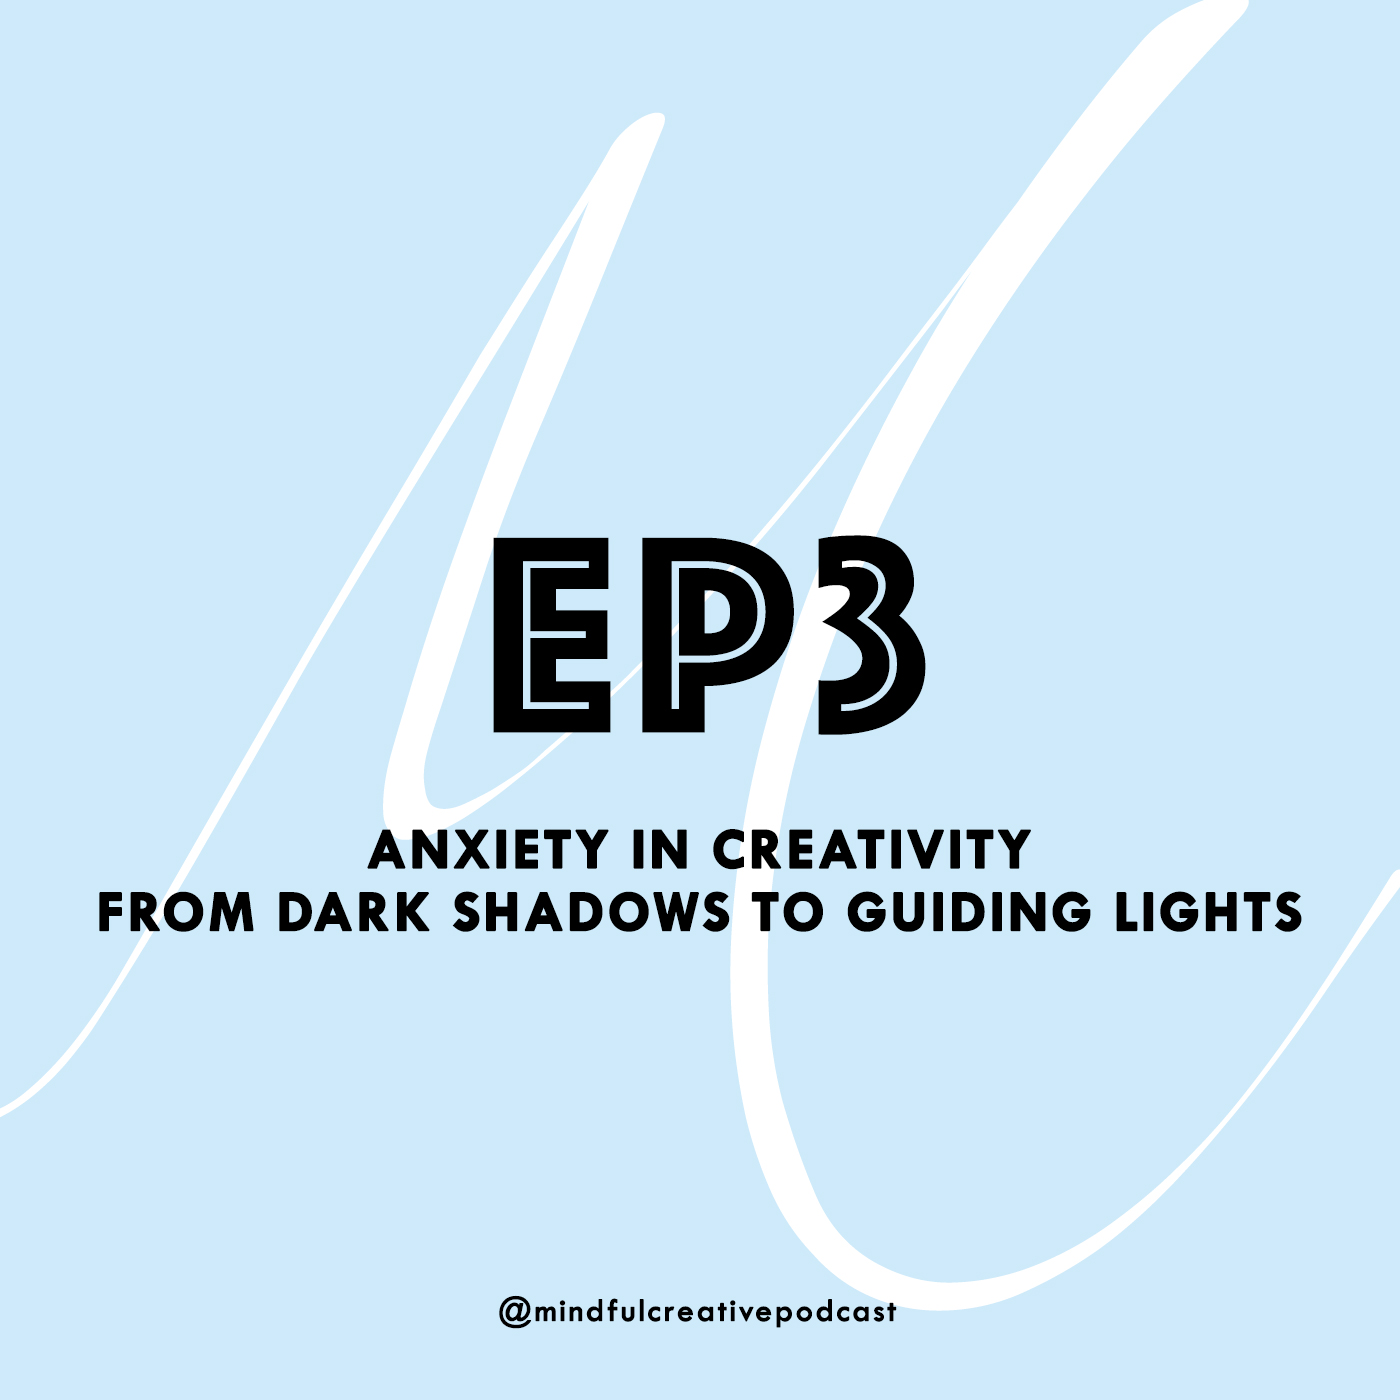 Episode 3 - Anxiety in Creativity. Dark Shadows to Guiding Lights.